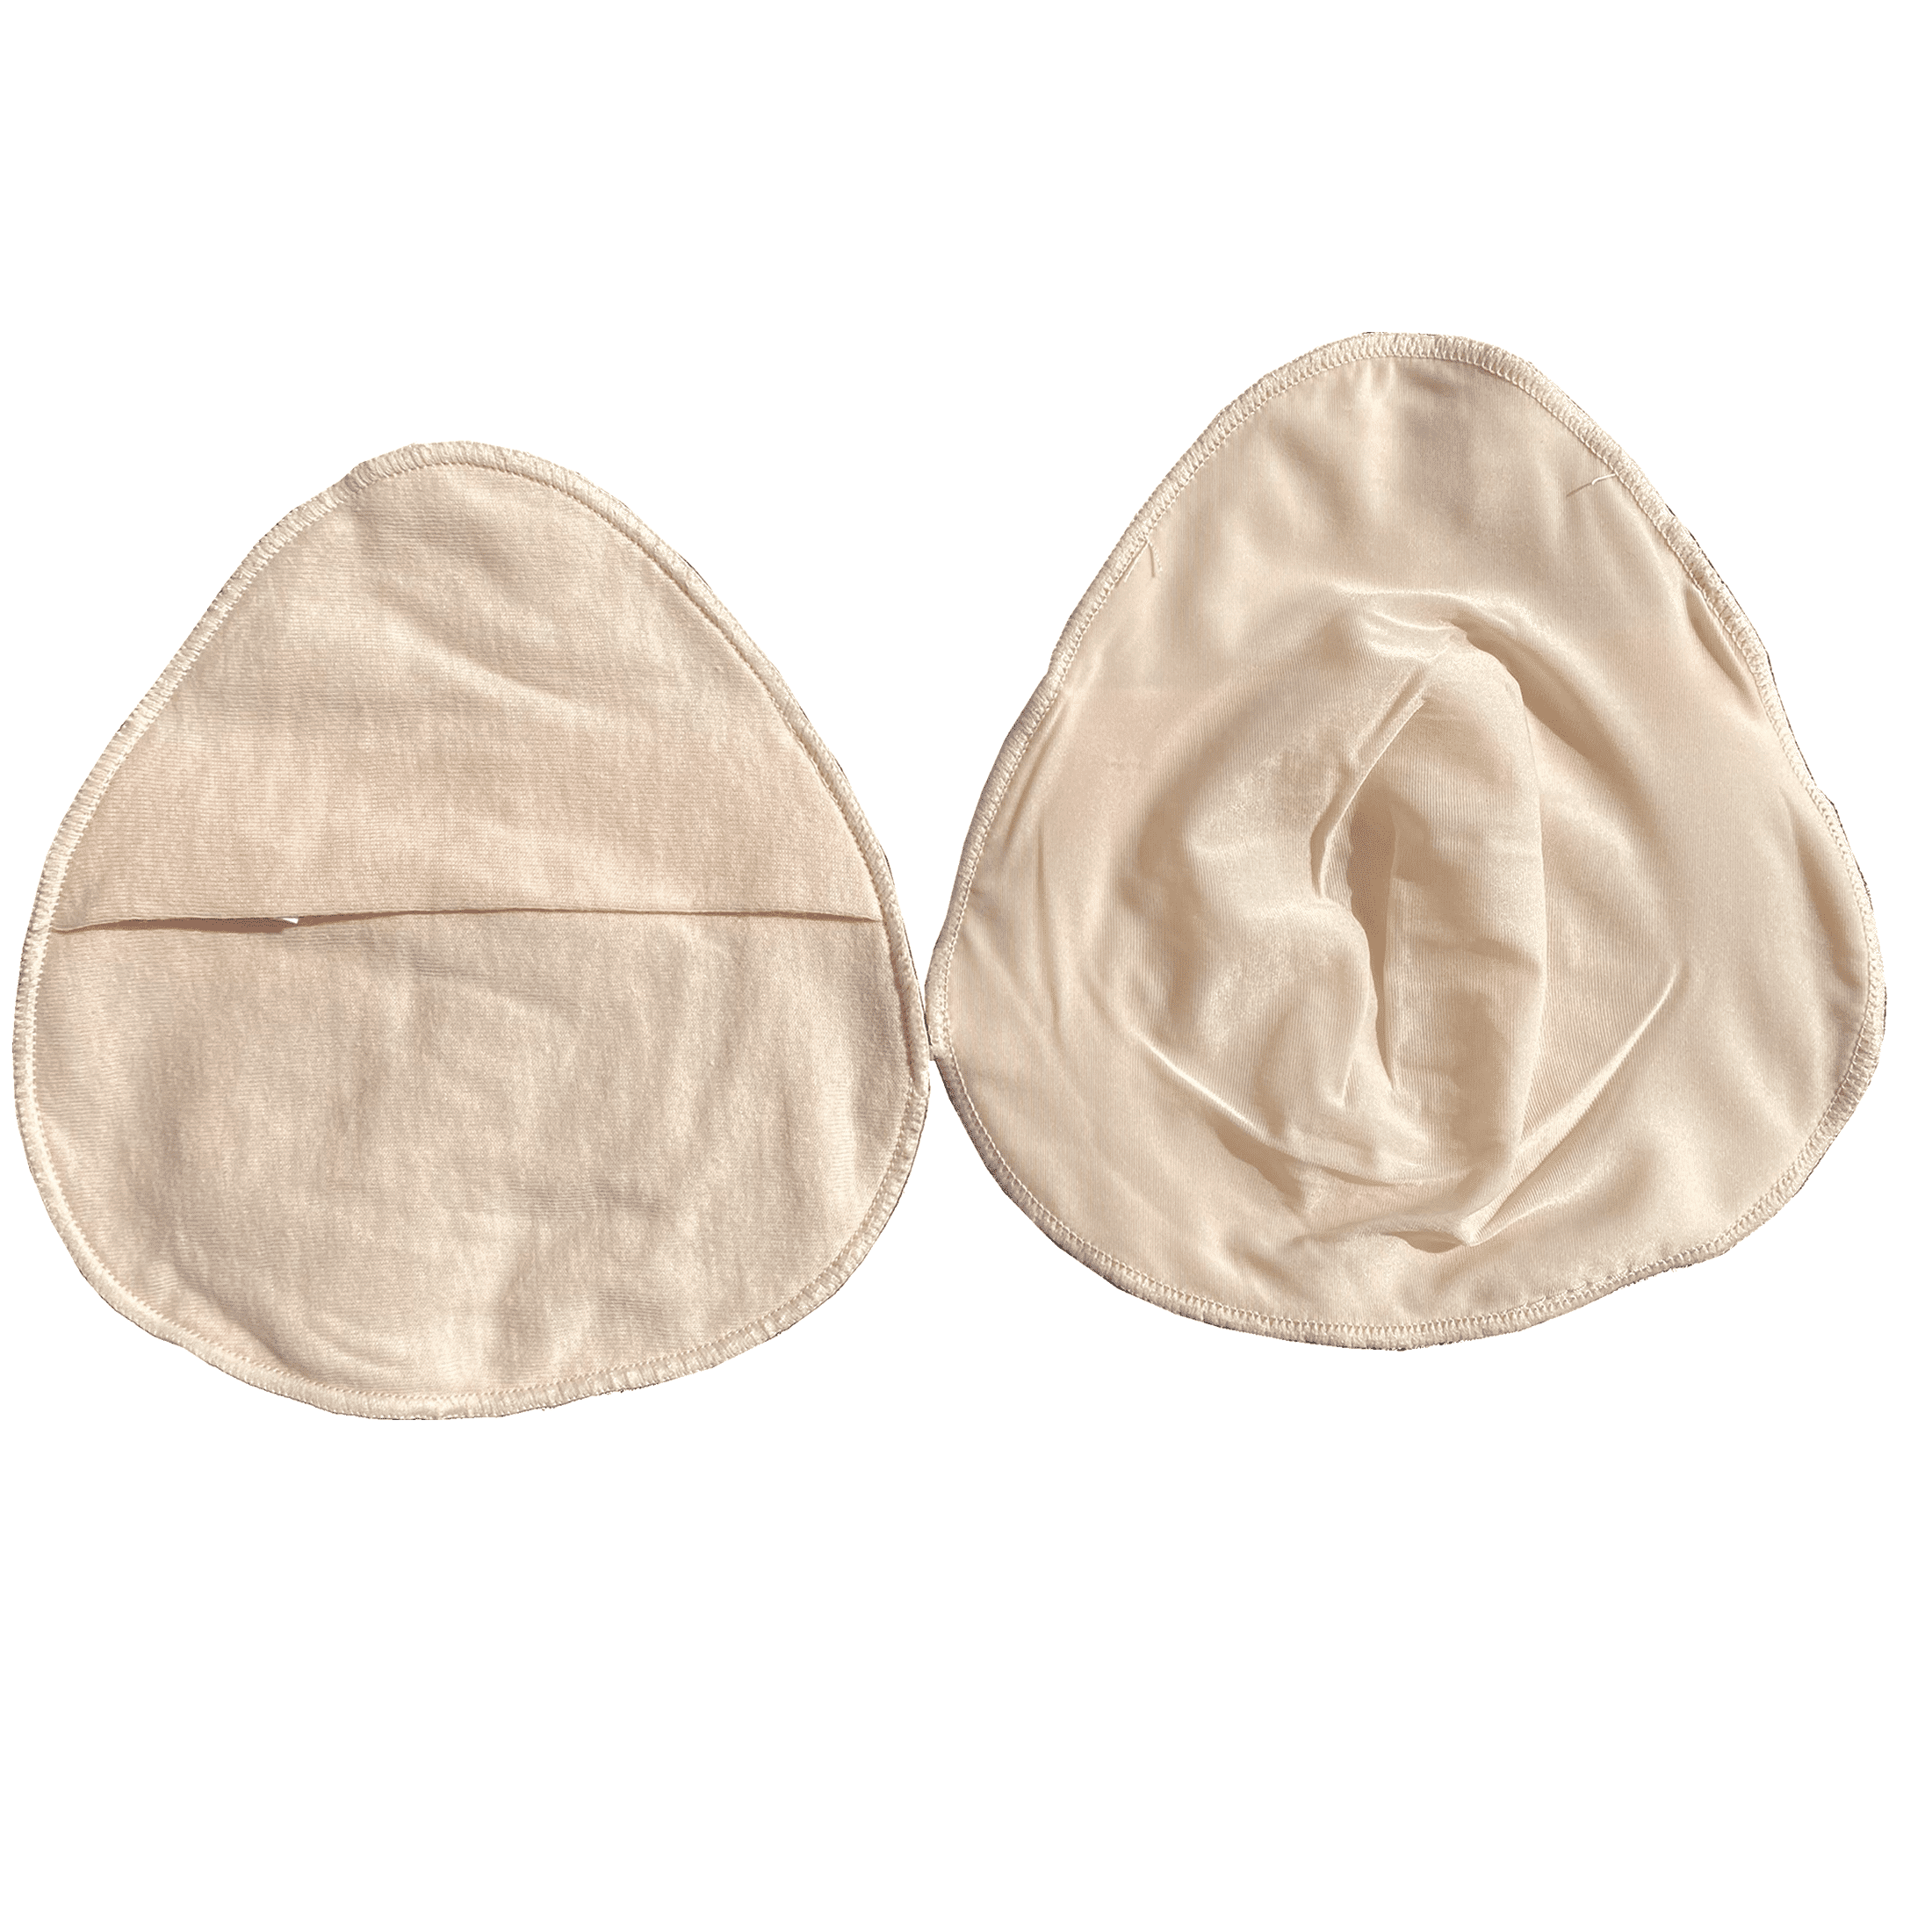 BIMEI Breathable Protect Pocket for Mastectomy Silicone Breast Forms Cover  Bags for Prosthesis Artificial Fake Boobs Triangular 1 Pair ,Beige,M 